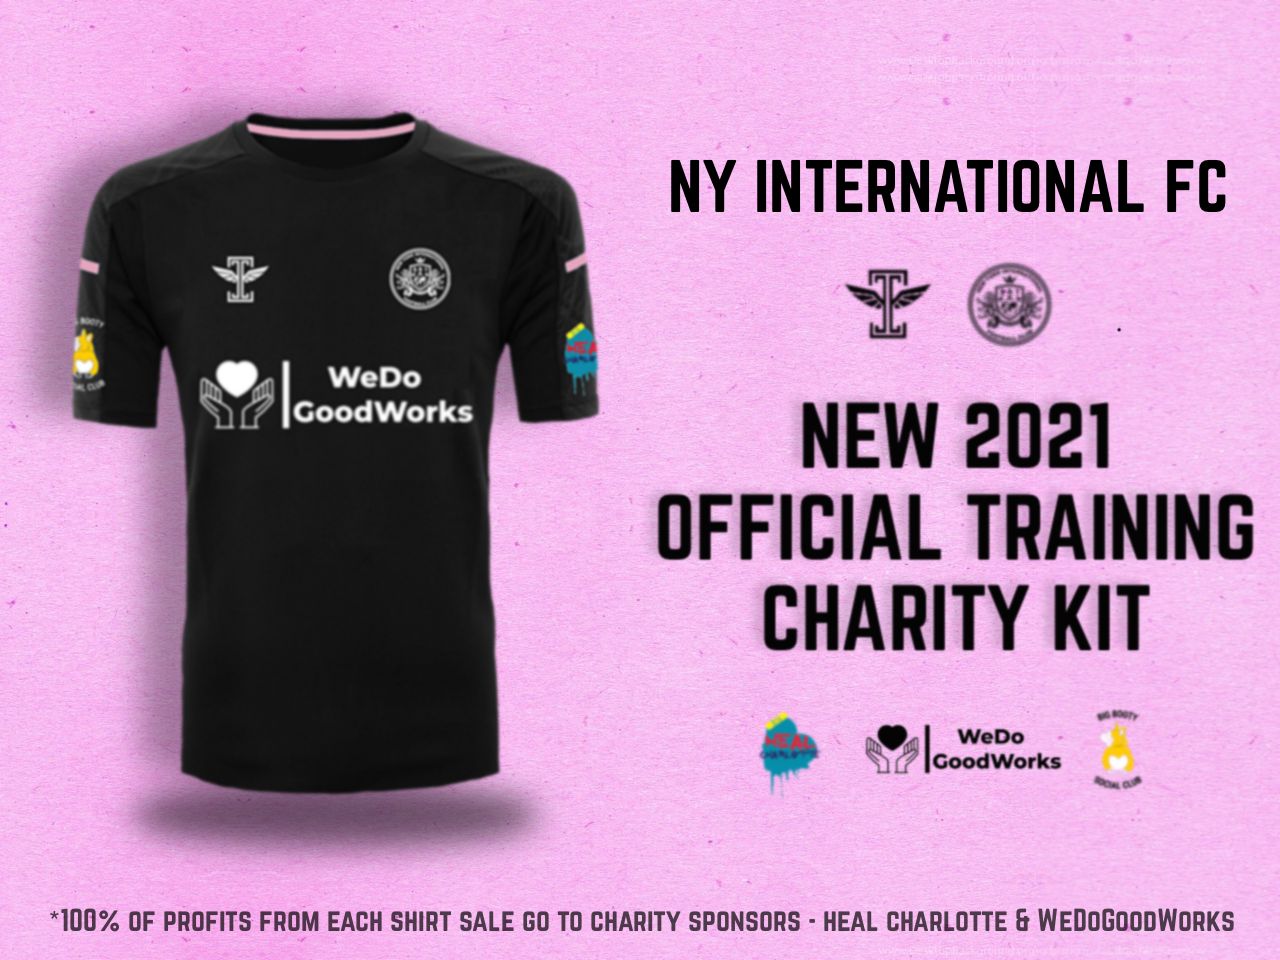 NYIFC Press Release, Charity Release and Training Sponsors Announcement